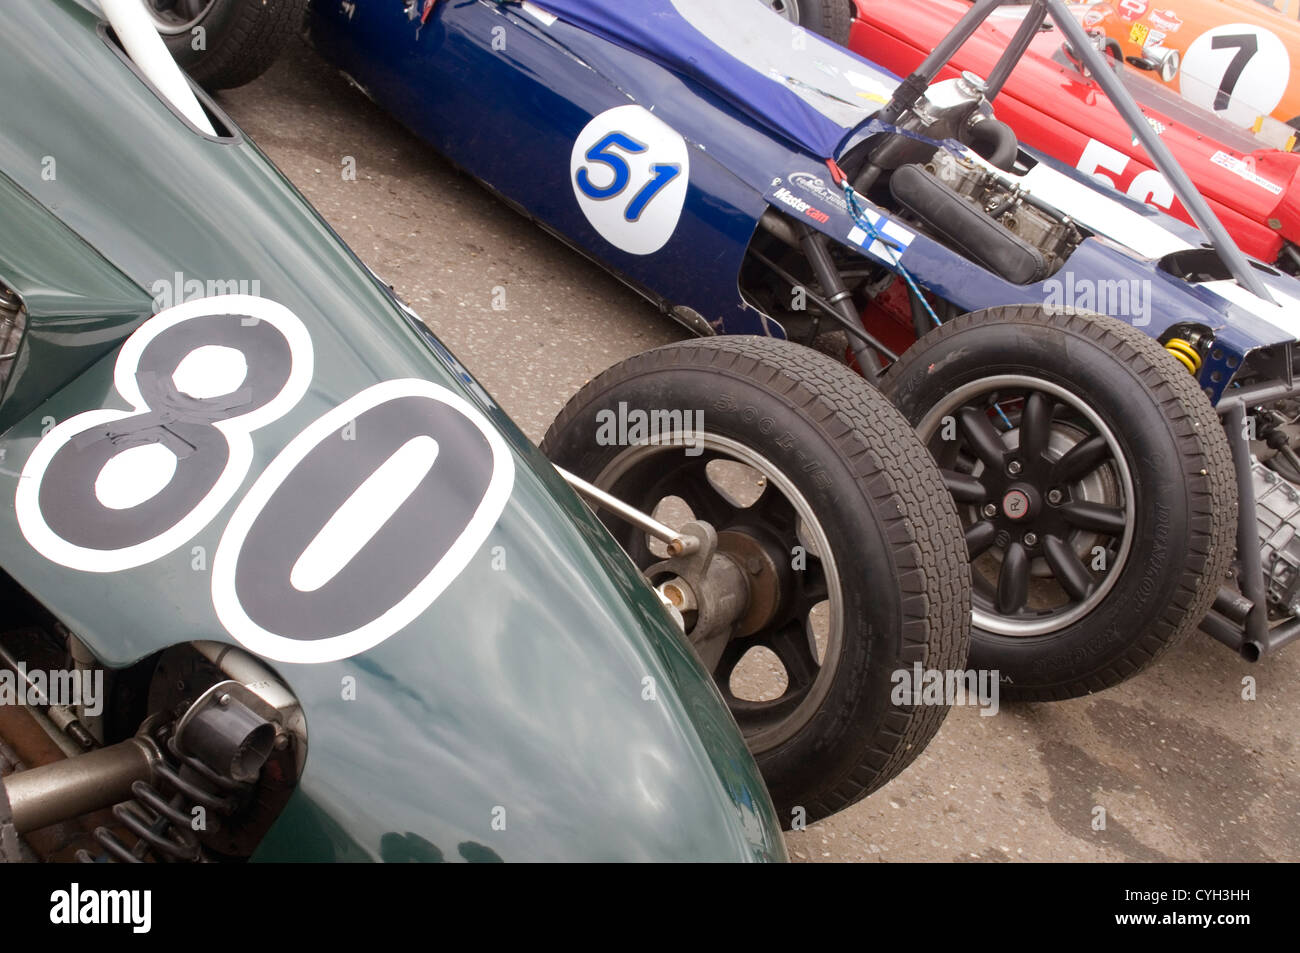 A line of racing cars being prepared before a race. Stock Photo